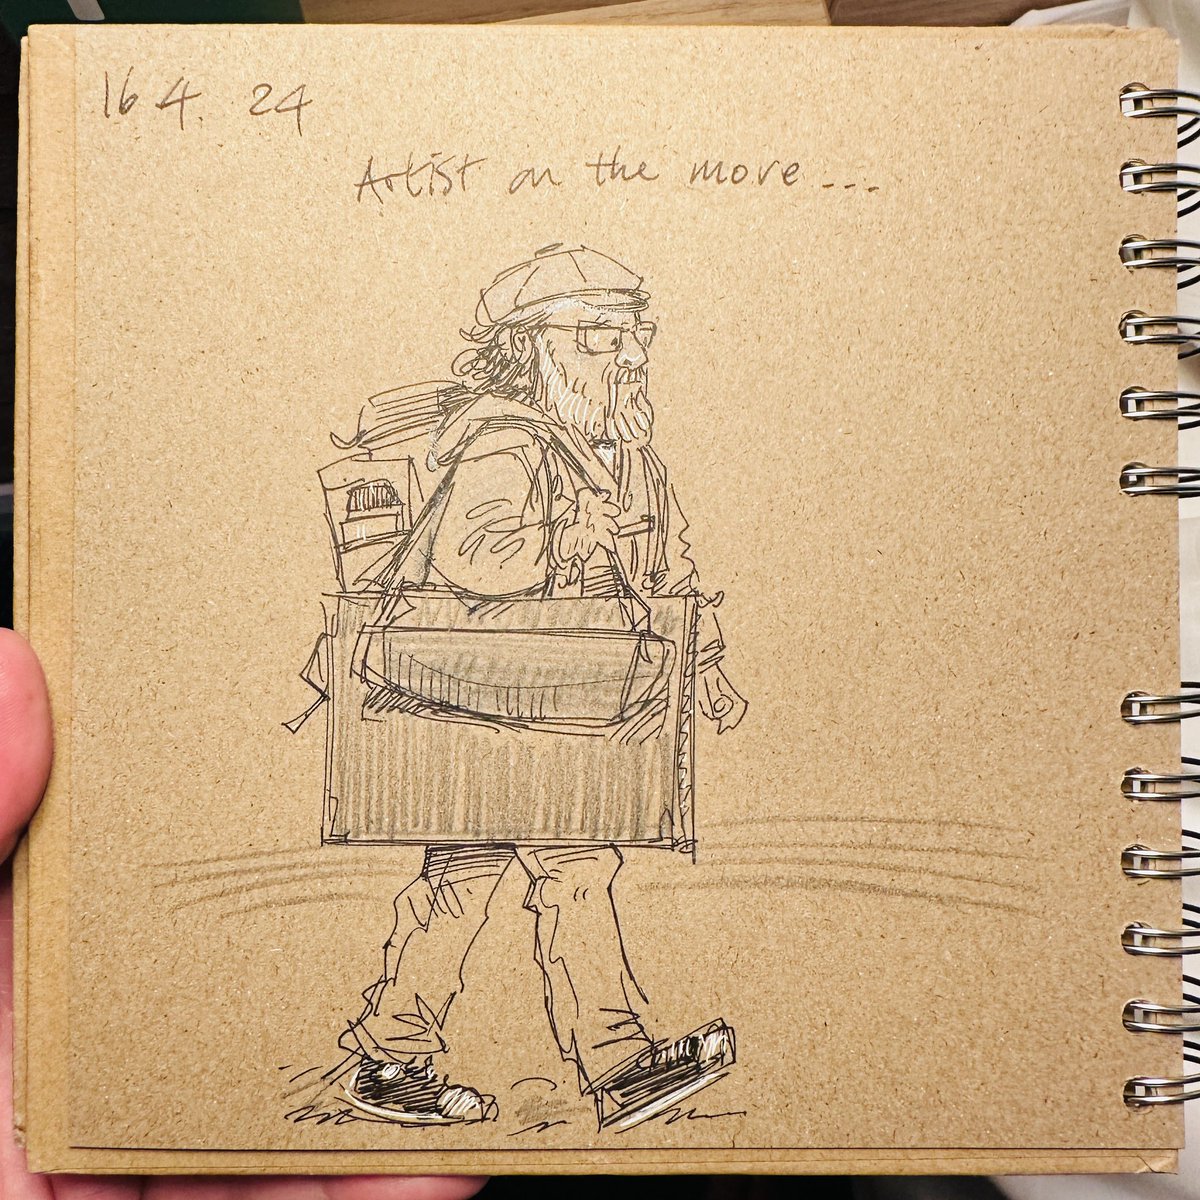 Metal field easle with carry bag - game changer!!! Off to run a workshop tomorrow with some of my favourite people… it’s times like this I feel so privileged that art is the basis of pretty much everything I do. Very lucky guy. #doodleaday #artistlife